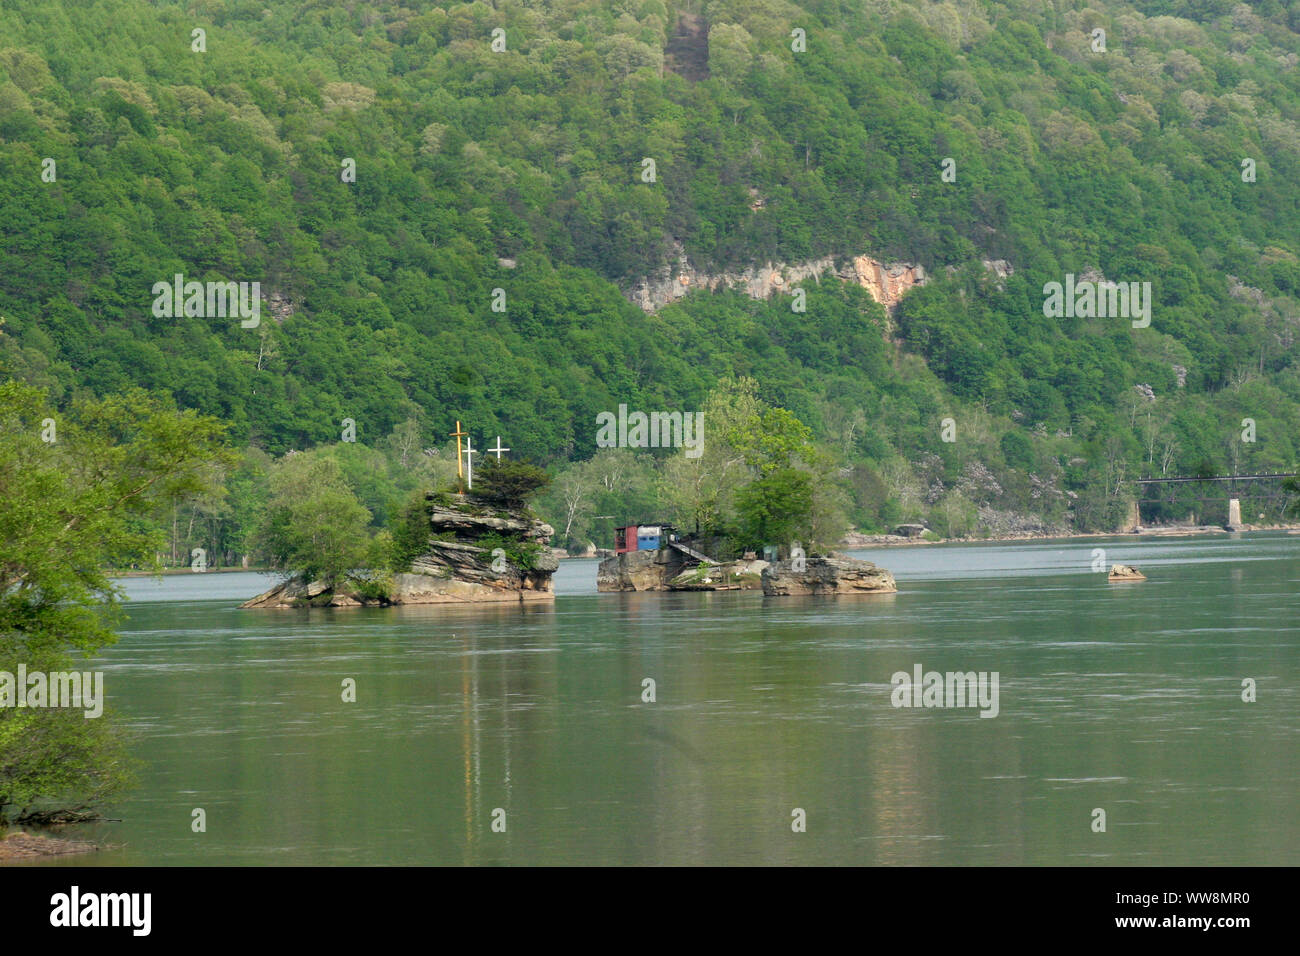 Gauley River in West Virginia, USA, with three crosses visible on a rock, a Christian symbol of resurrection Stock Photo